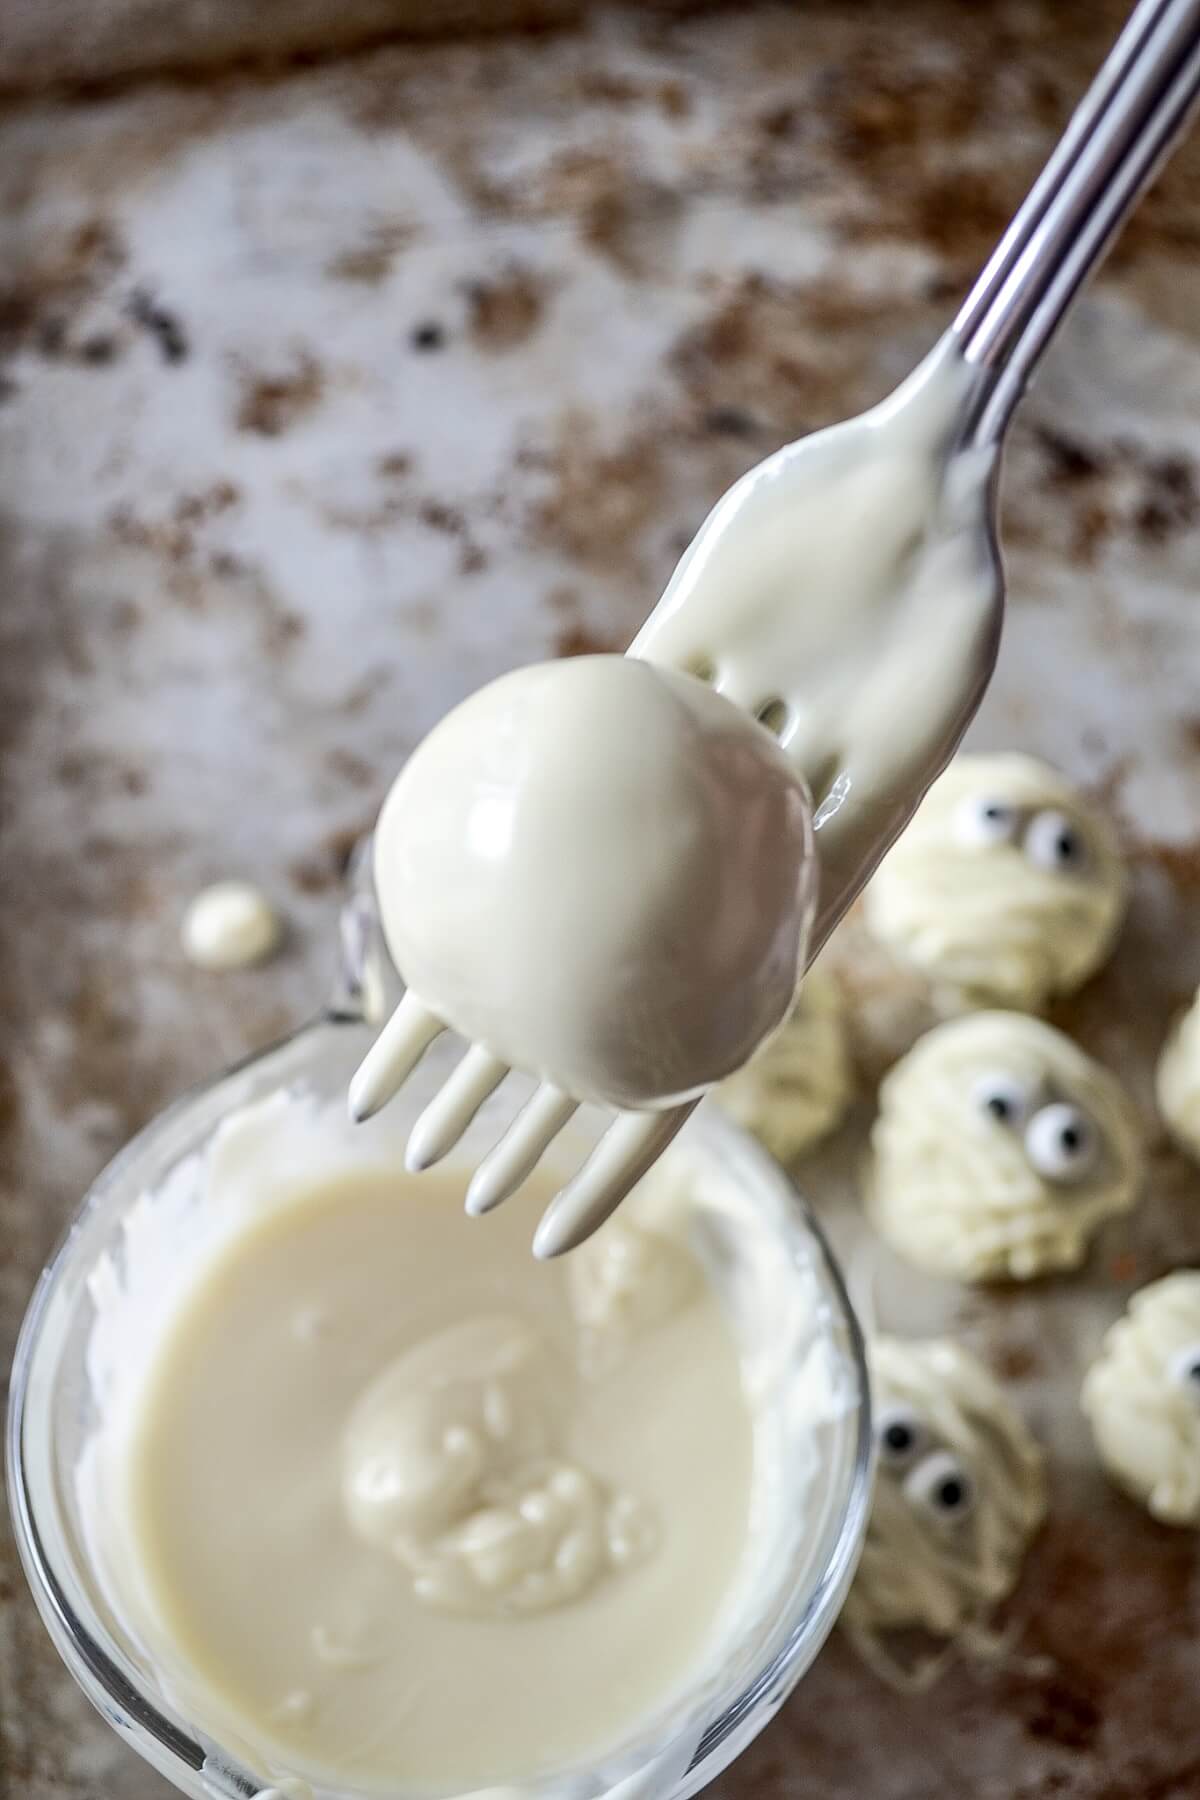 Allowing excess white chocolate to drip from a freshly dipped oreo truffle.